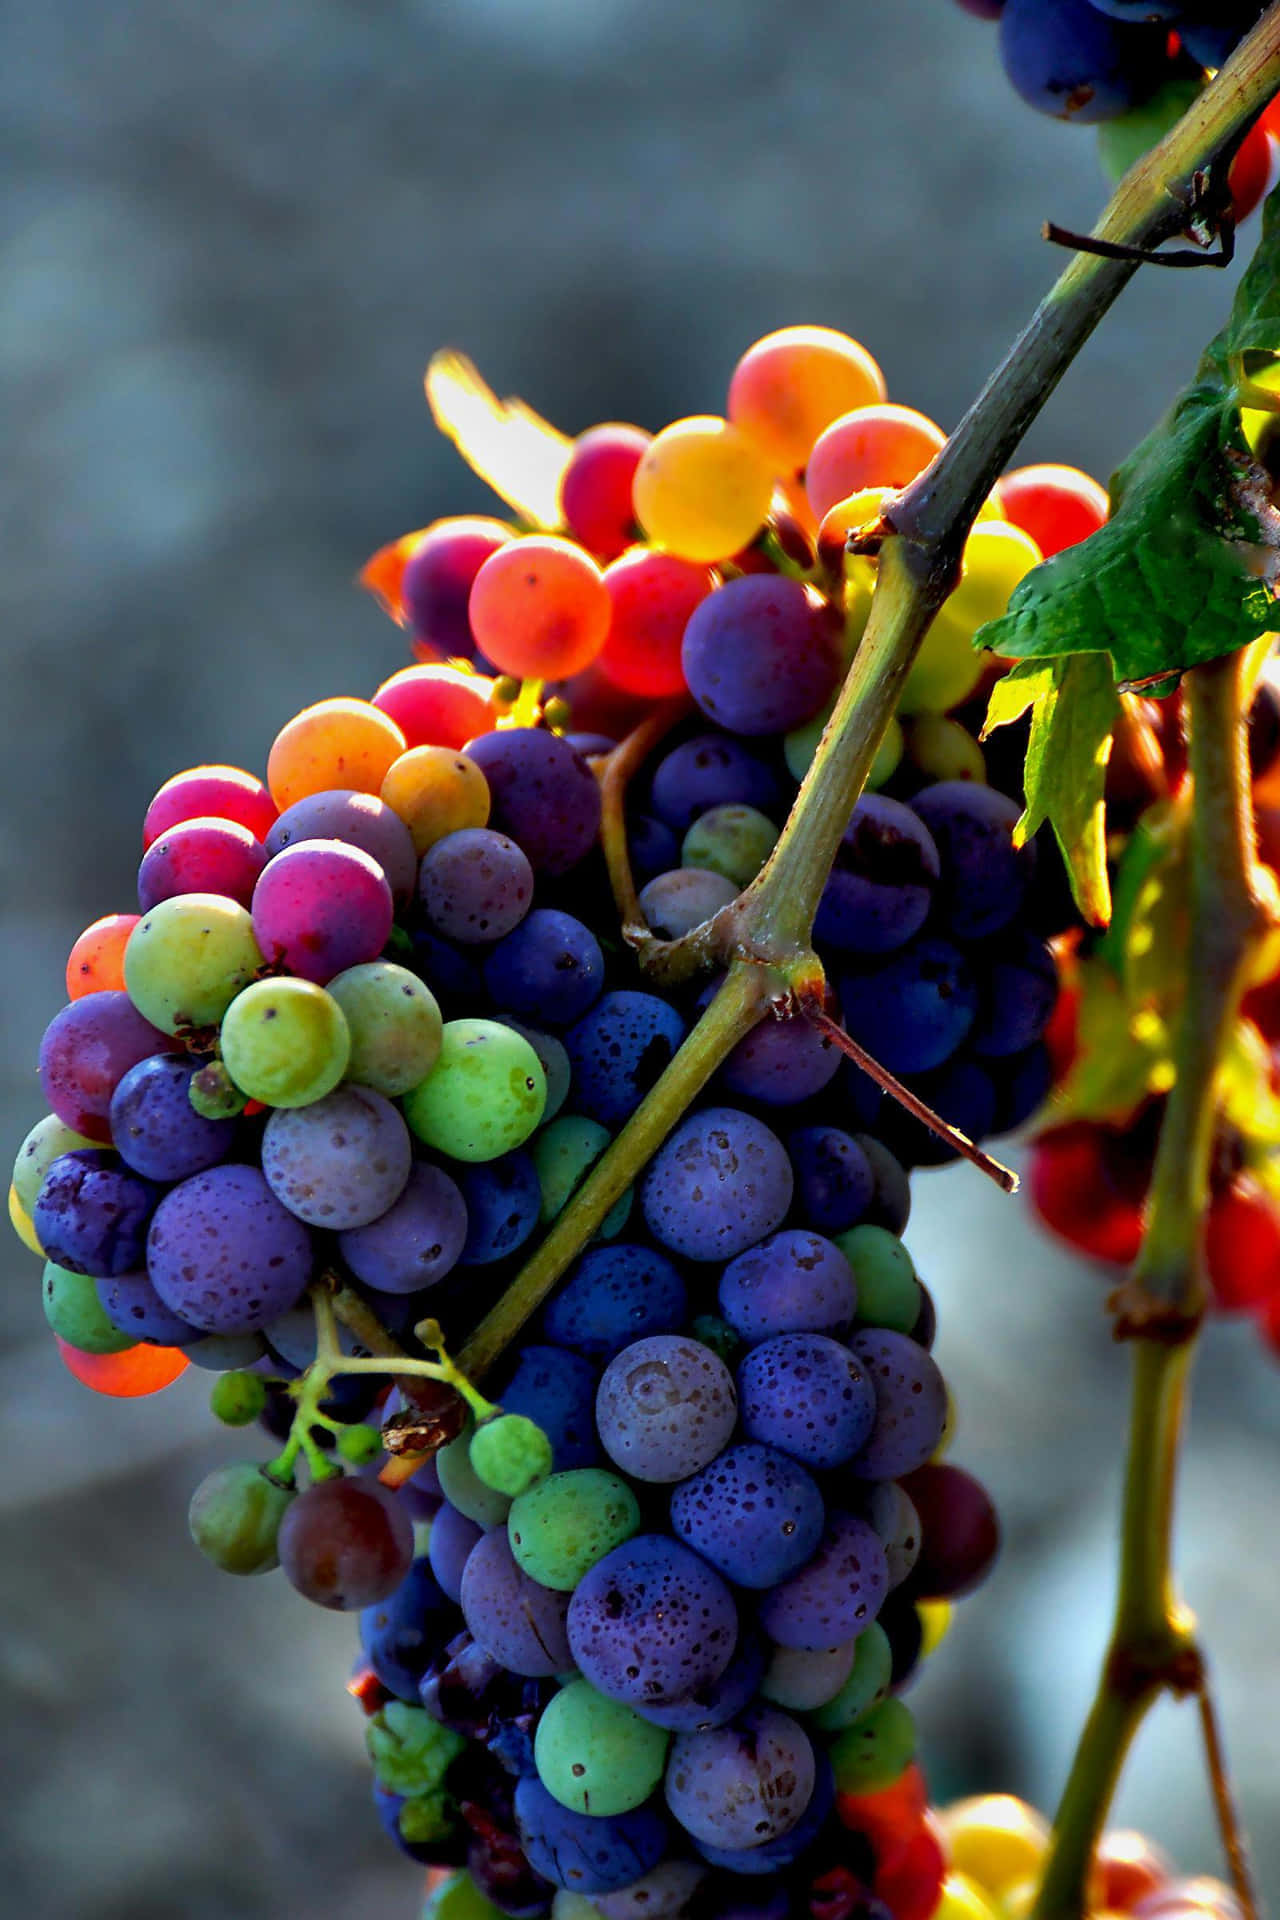 Delicious and Refreshment – A Bunch of Grapes